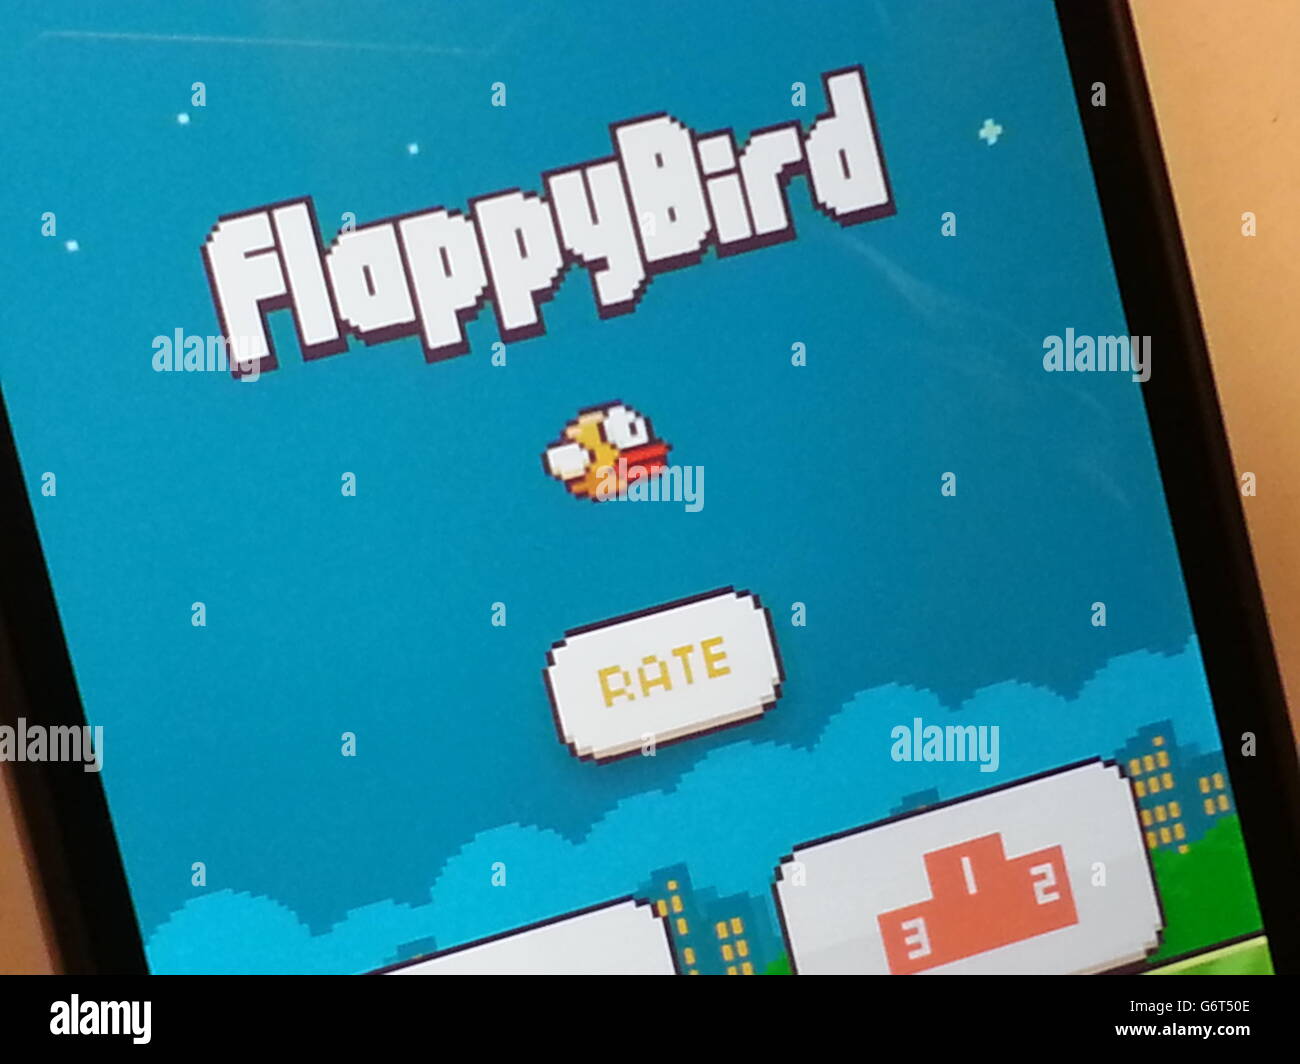 FlappyBird stock. A view of the FlappyBird game open on an iPhone. Stock Photo